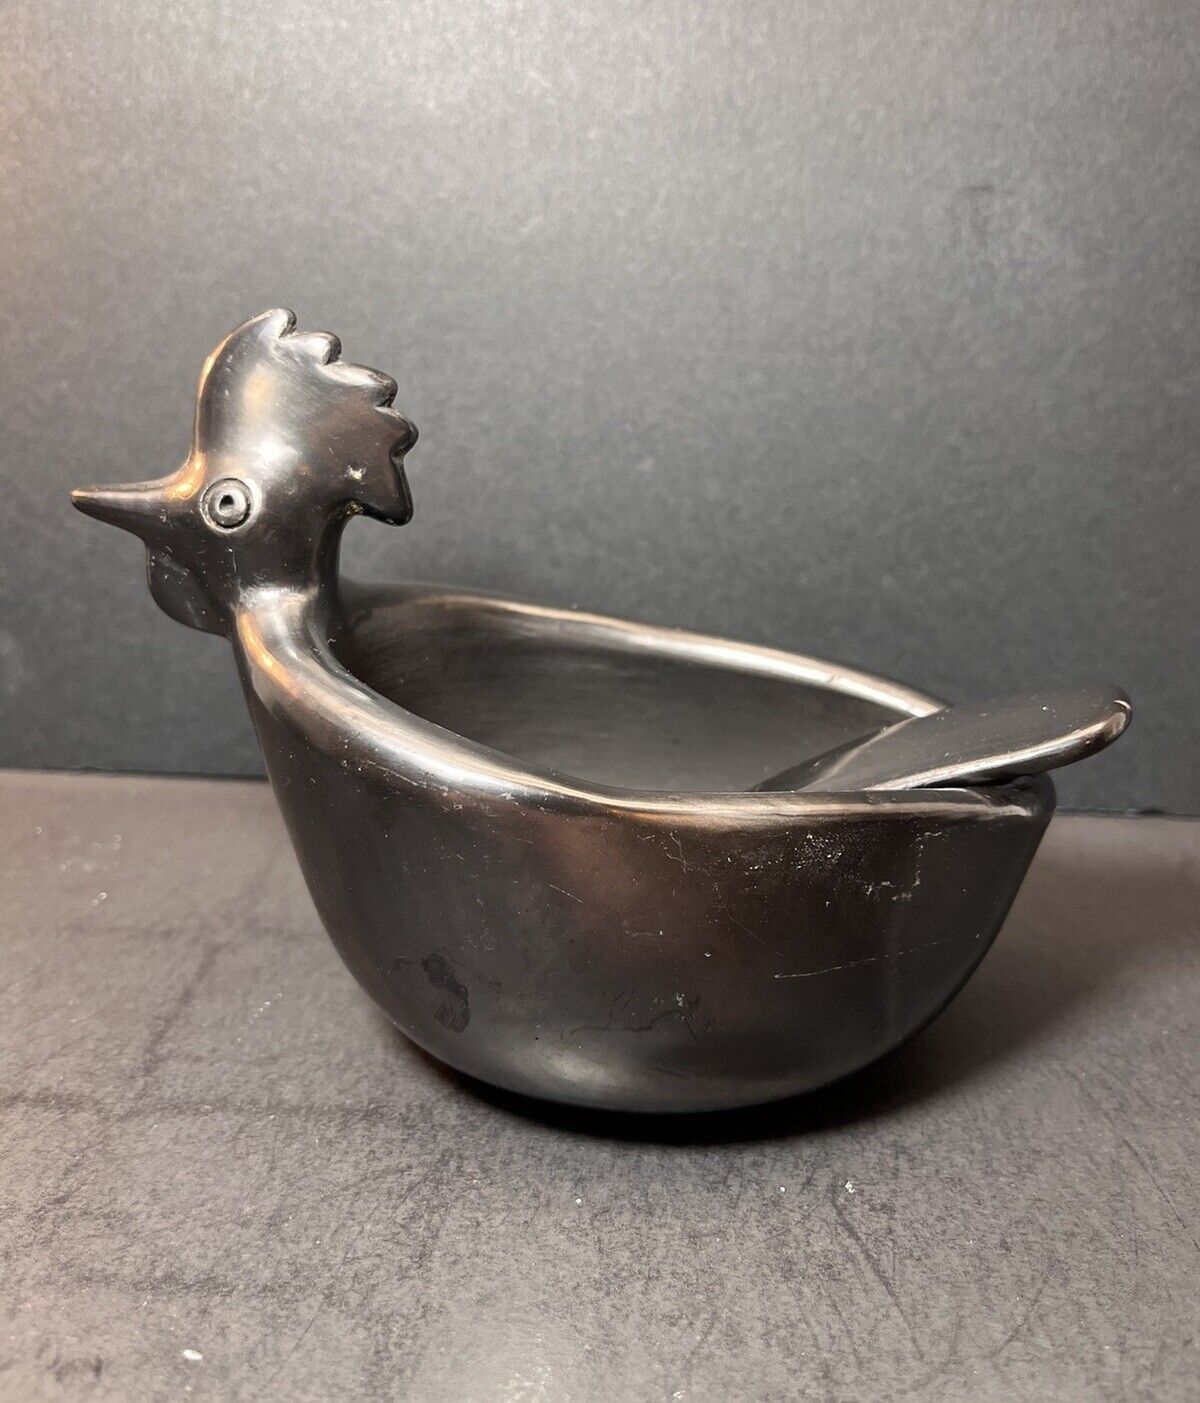 Oaxaca Mexico Black Clay Rooster Bowl with Spoon